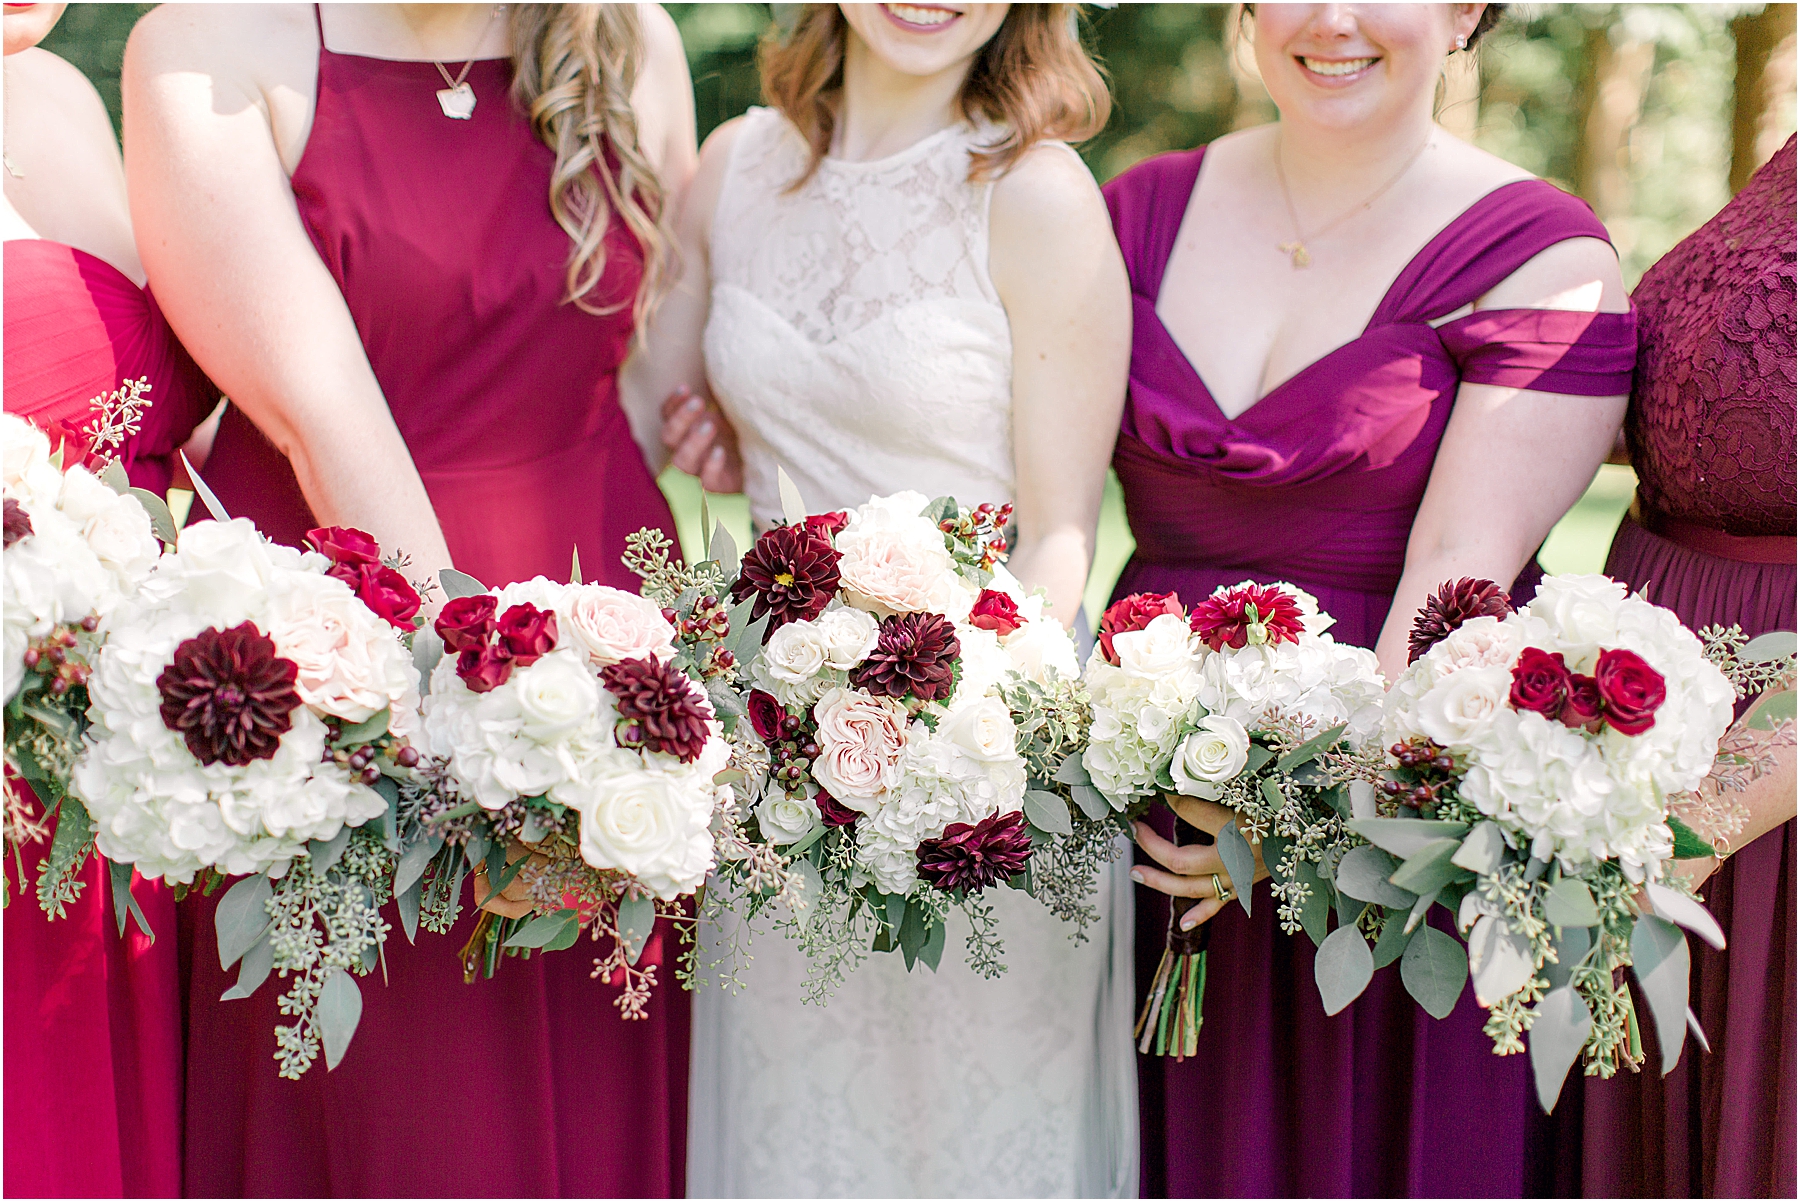 maroon and white wedding bouquets with seeded eucolyptus